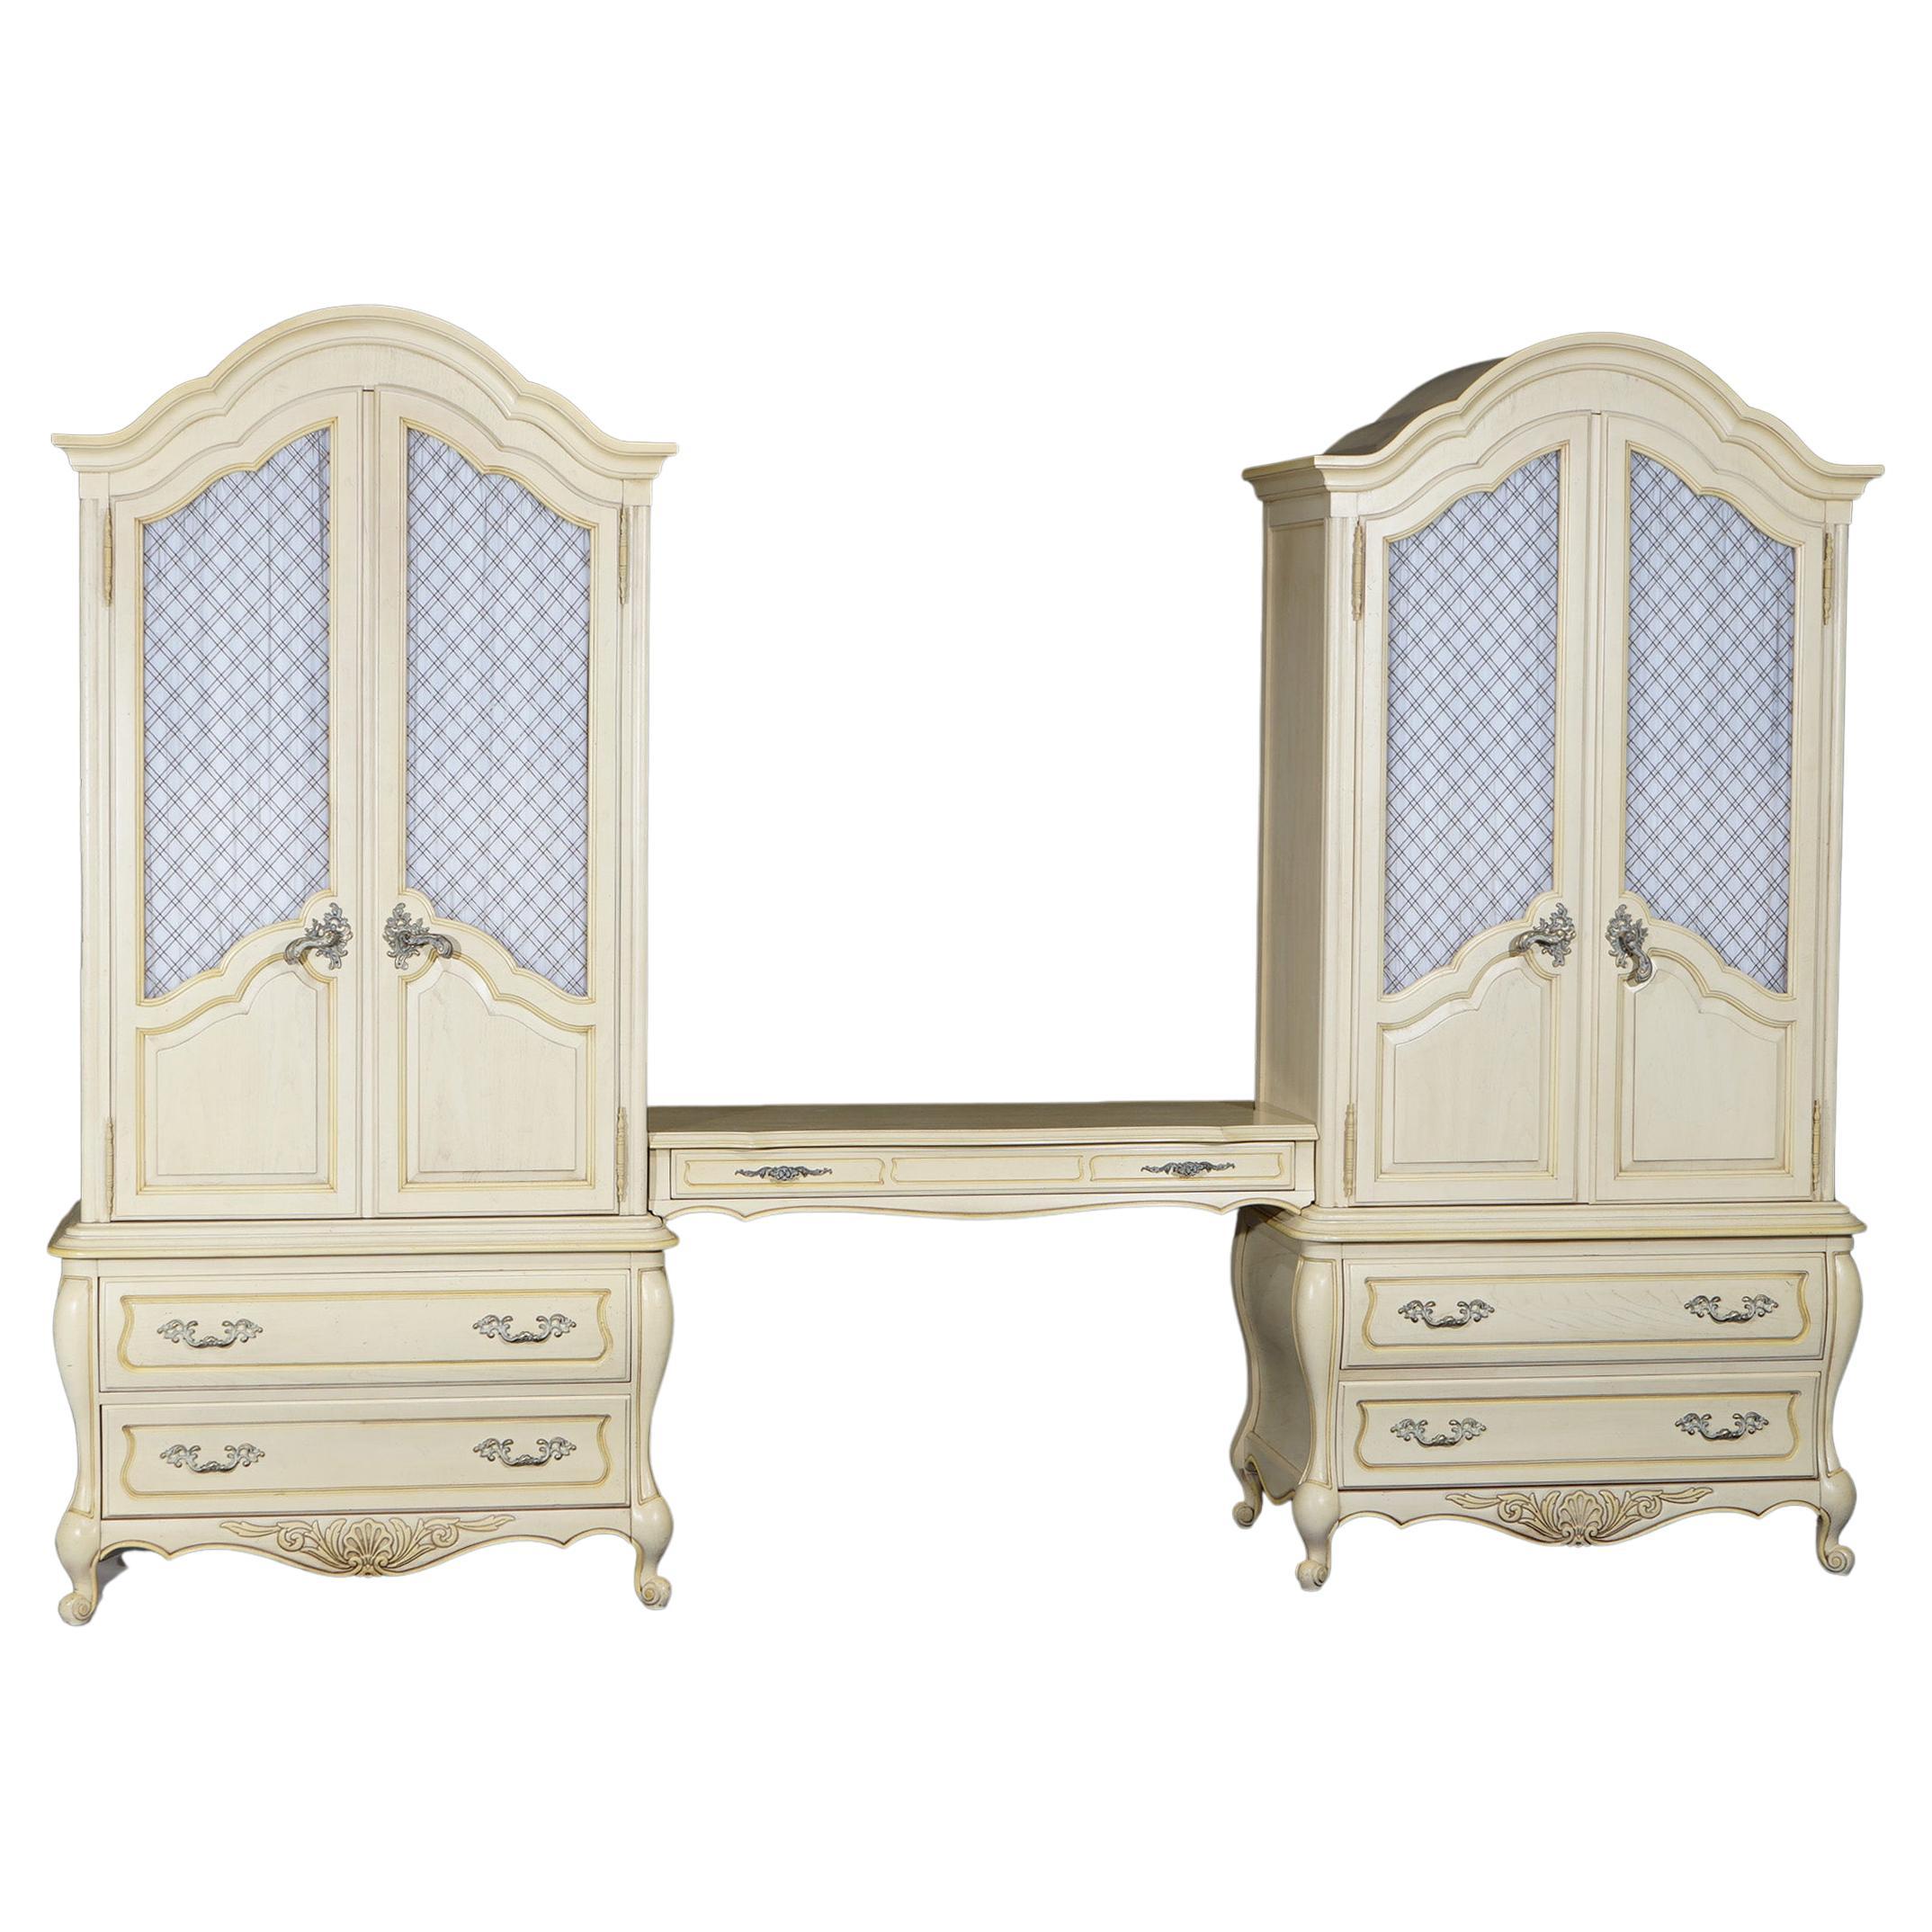 Pair of French Provincial Wardrobes with Dressing Table by Hickory, 20thC